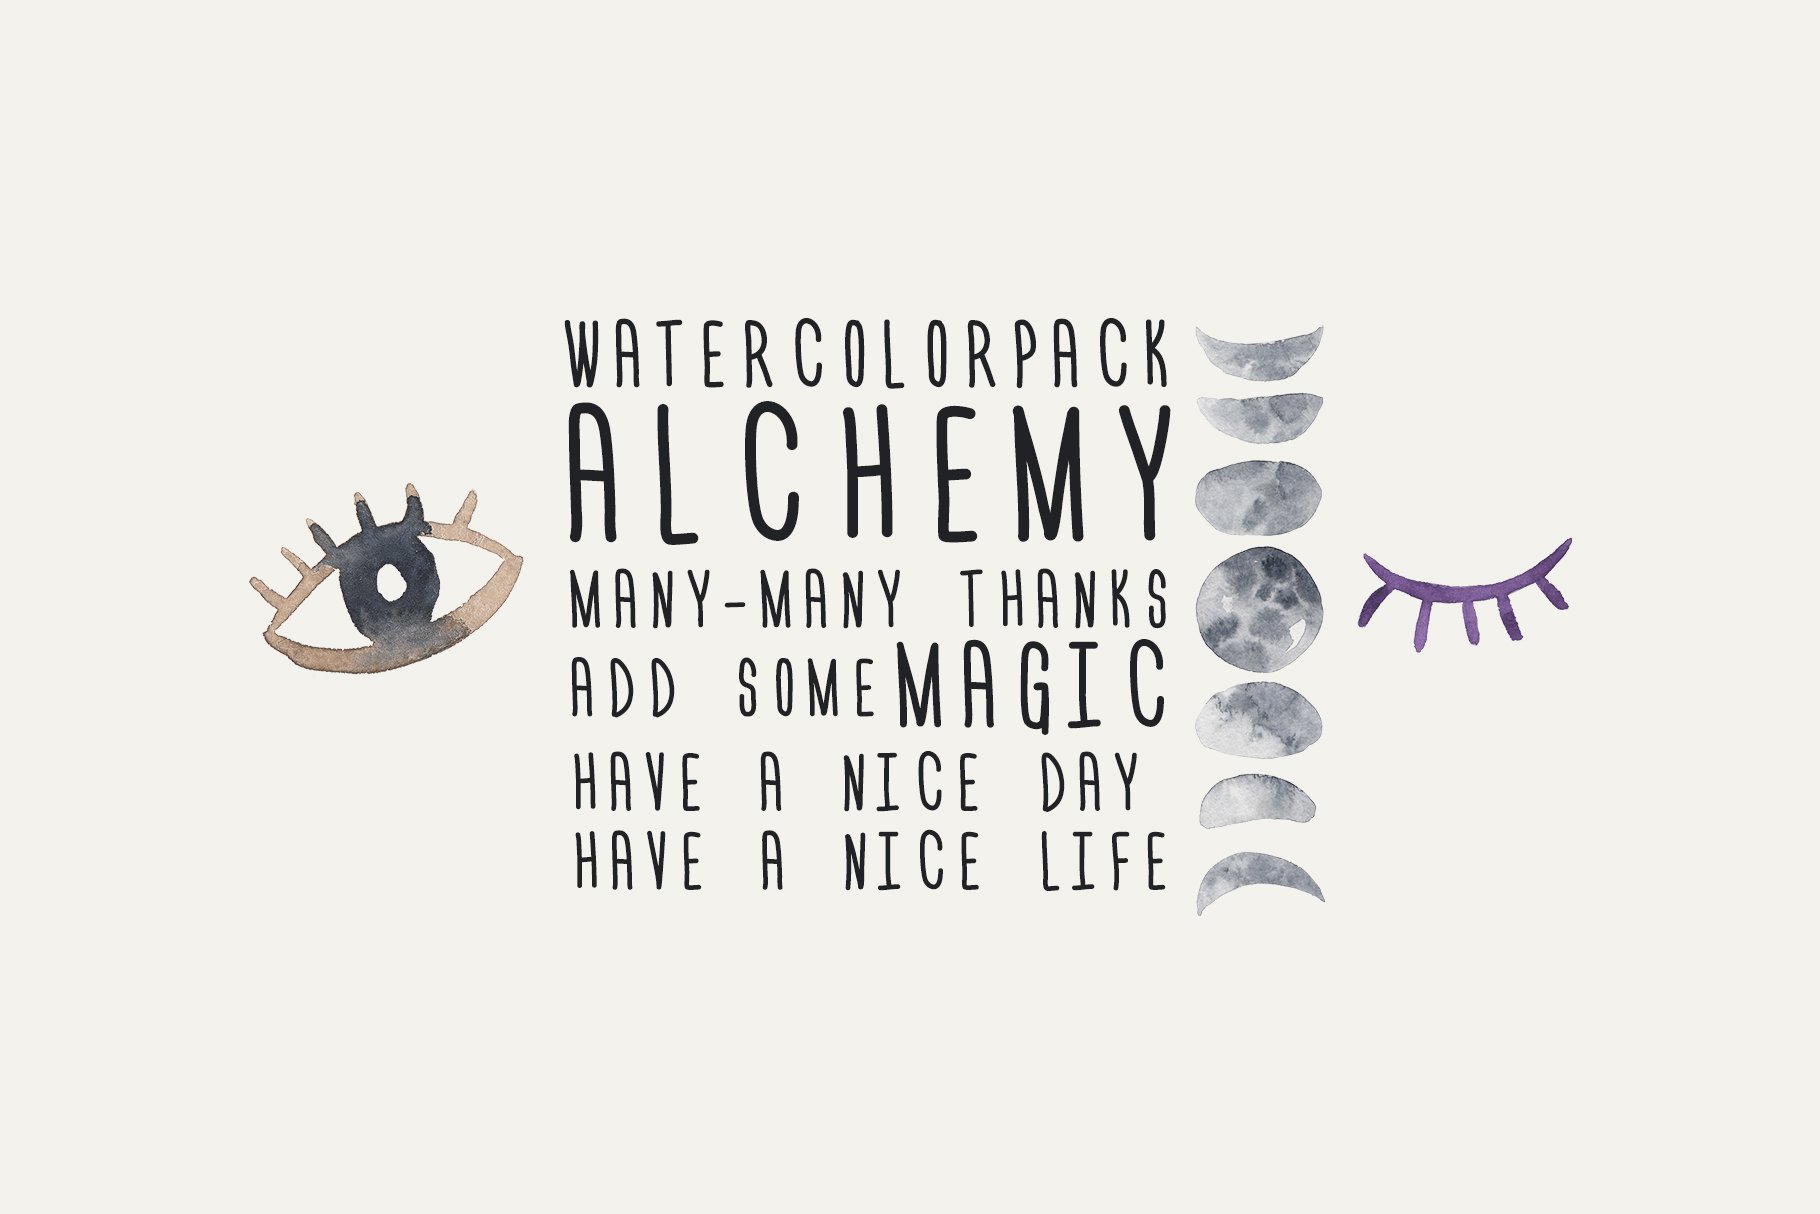 Alchemy Magic Watercolor Pack